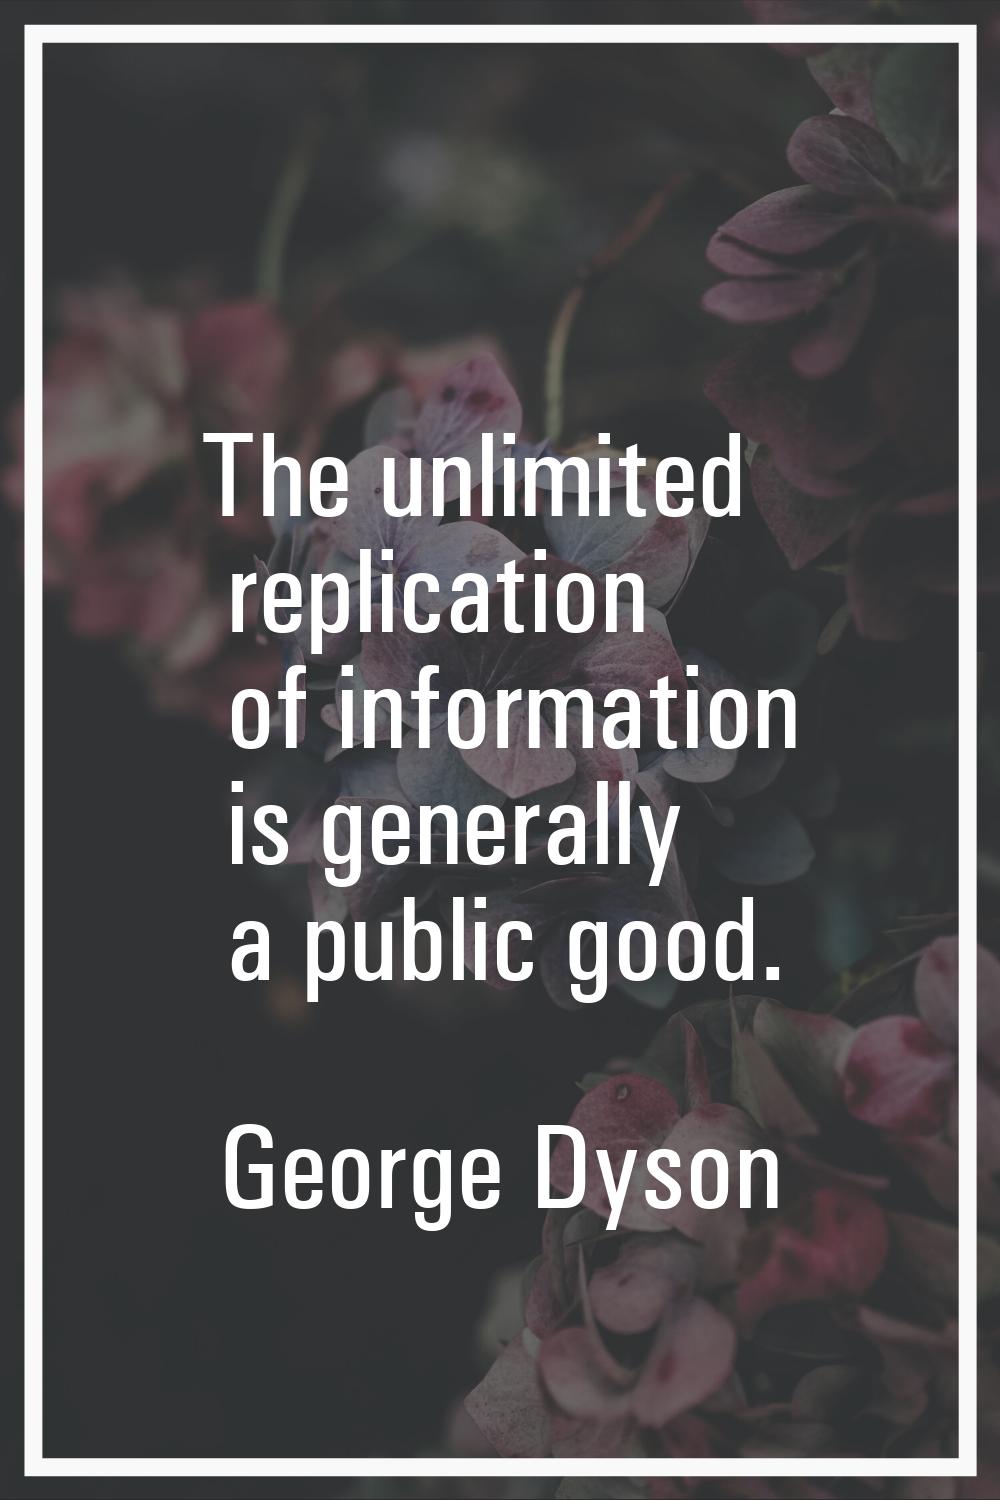 The unlimited replication of information is generally a public good.